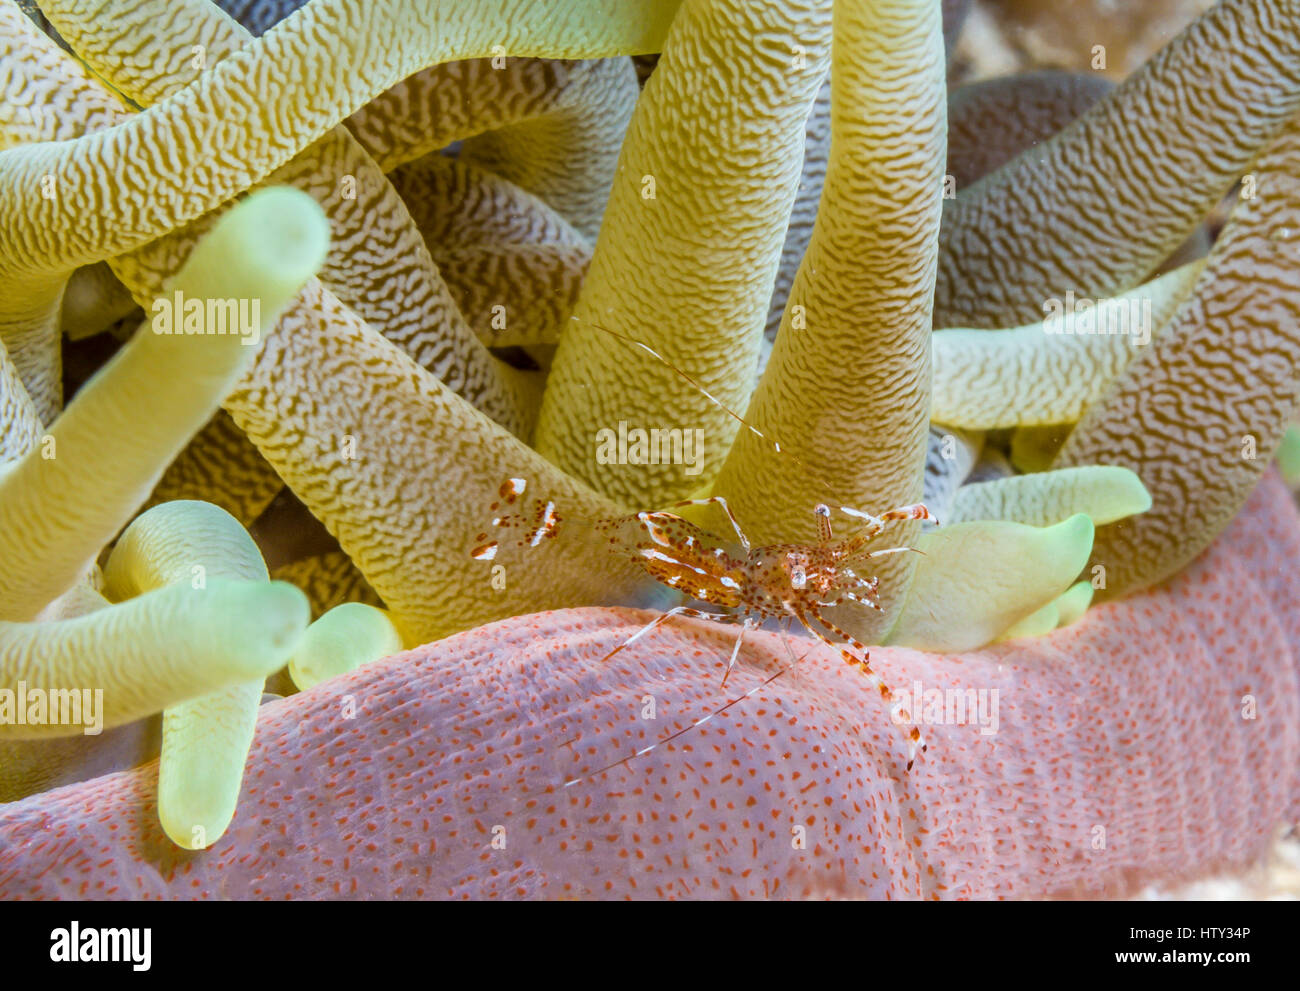 spotted cleaner shrimp,Periclimenes yucatanicus, is a kind of cleaner shrimp common to the Caribbean Sea. Stock Photo